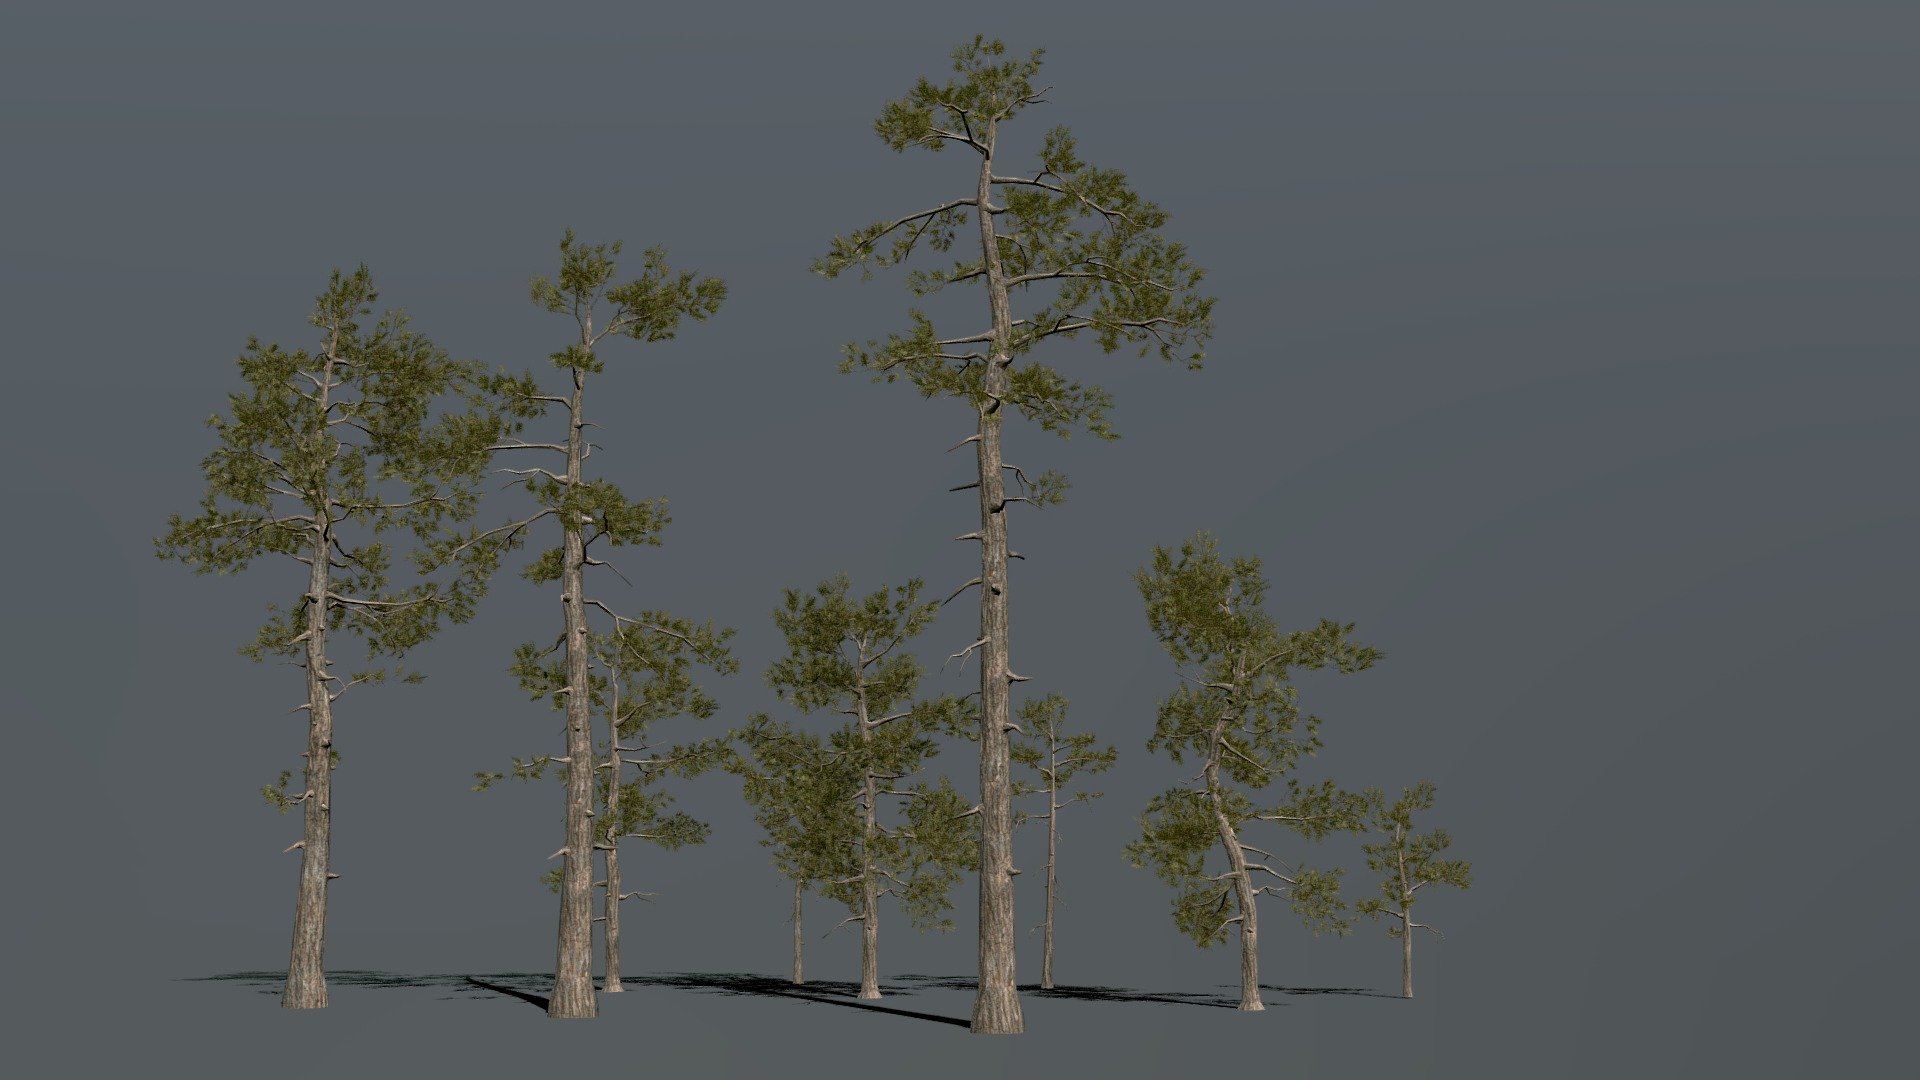 Game ready asset for scary dark Forest with death woods.

The moderate polygon count allows these models to be used for mobile applications. ( Abou 9k tris for big trees ) 3d model